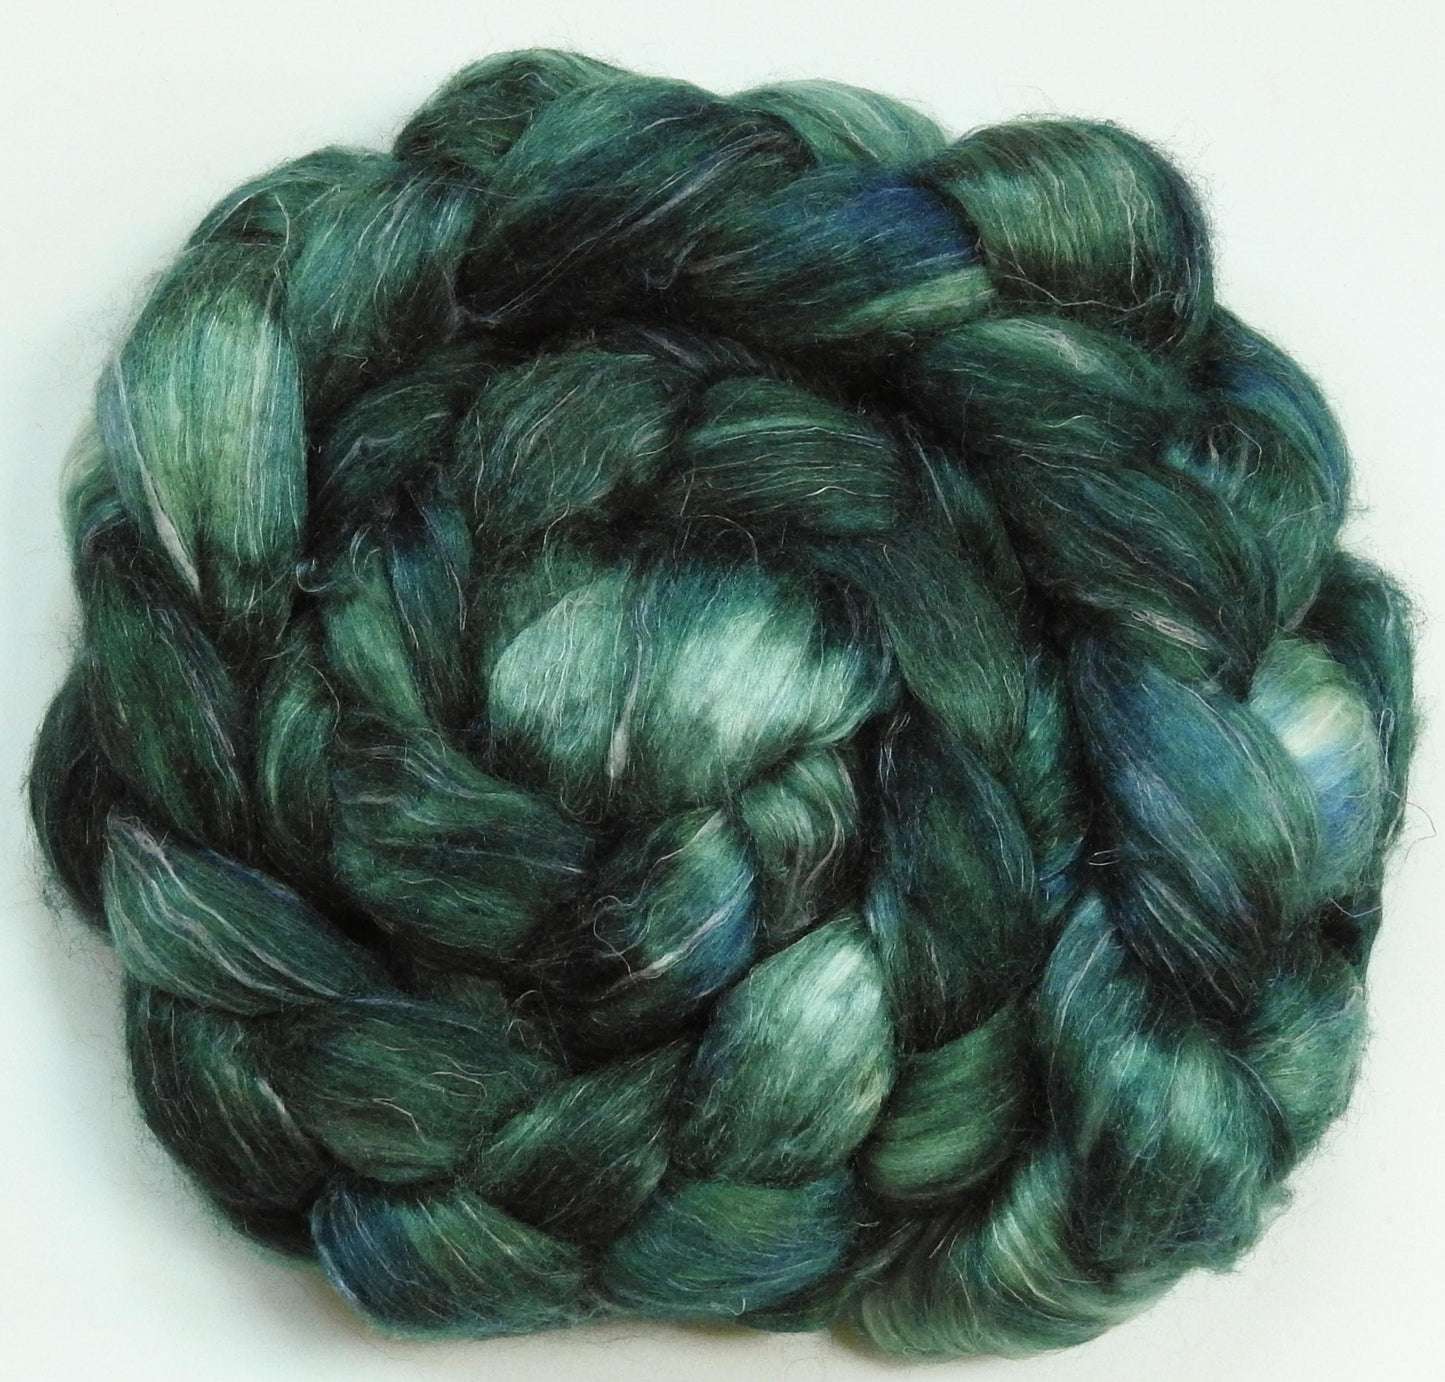 Courgette (6.1 oz) - Tussah Silk / flax roving (65/35)